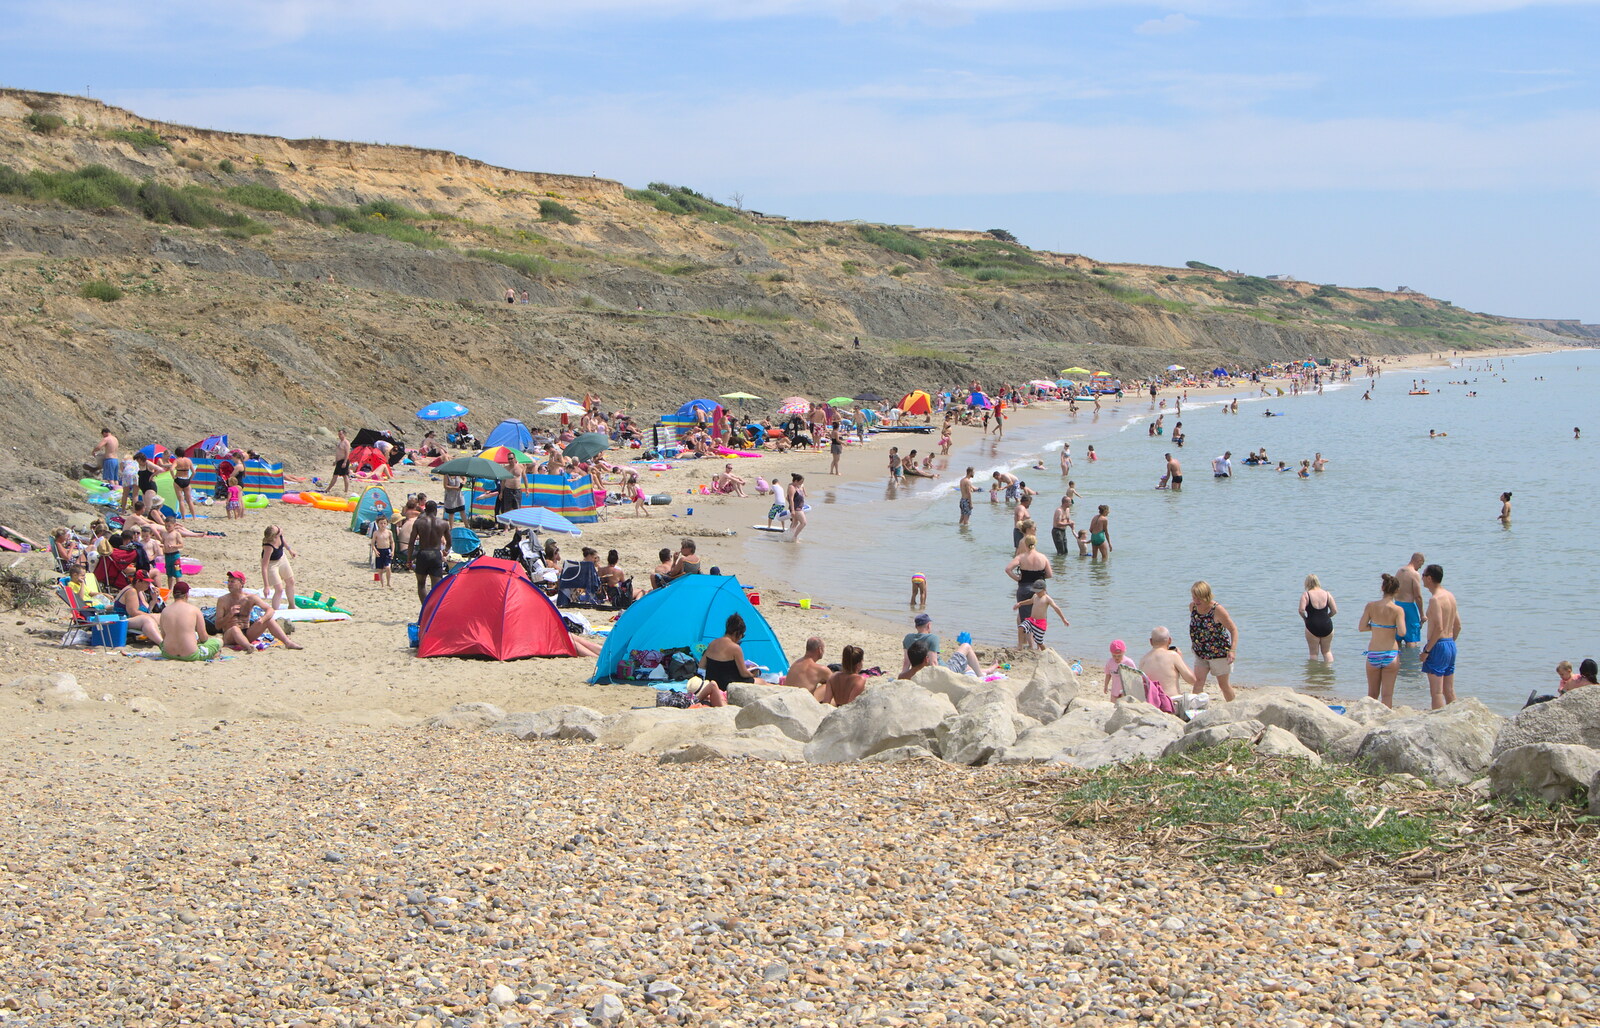 The crowded beach at Chewton Bunny from Bob and Bernice's 50th Wedding Anniversary, Hinton Admiral, Dorset - 25th July 2014